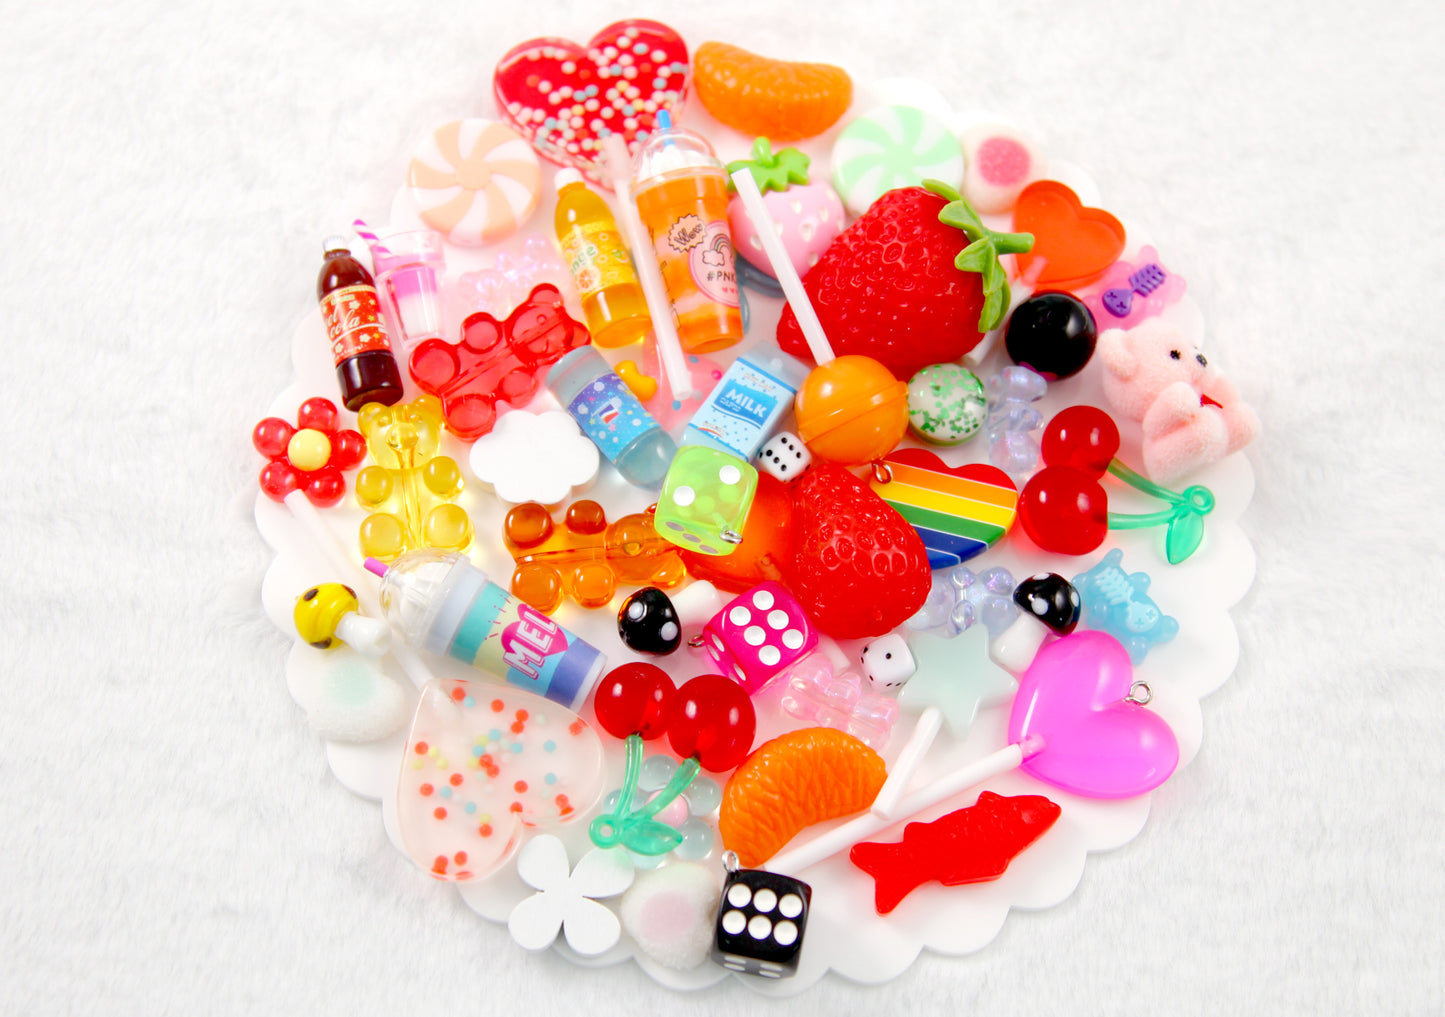 Candy Grab Bag - 50 pcs Cute Mixed Lot of Plastic Charms, Flatbacks and Beads - for kandi, ispy, sensory crafts, jewelry making